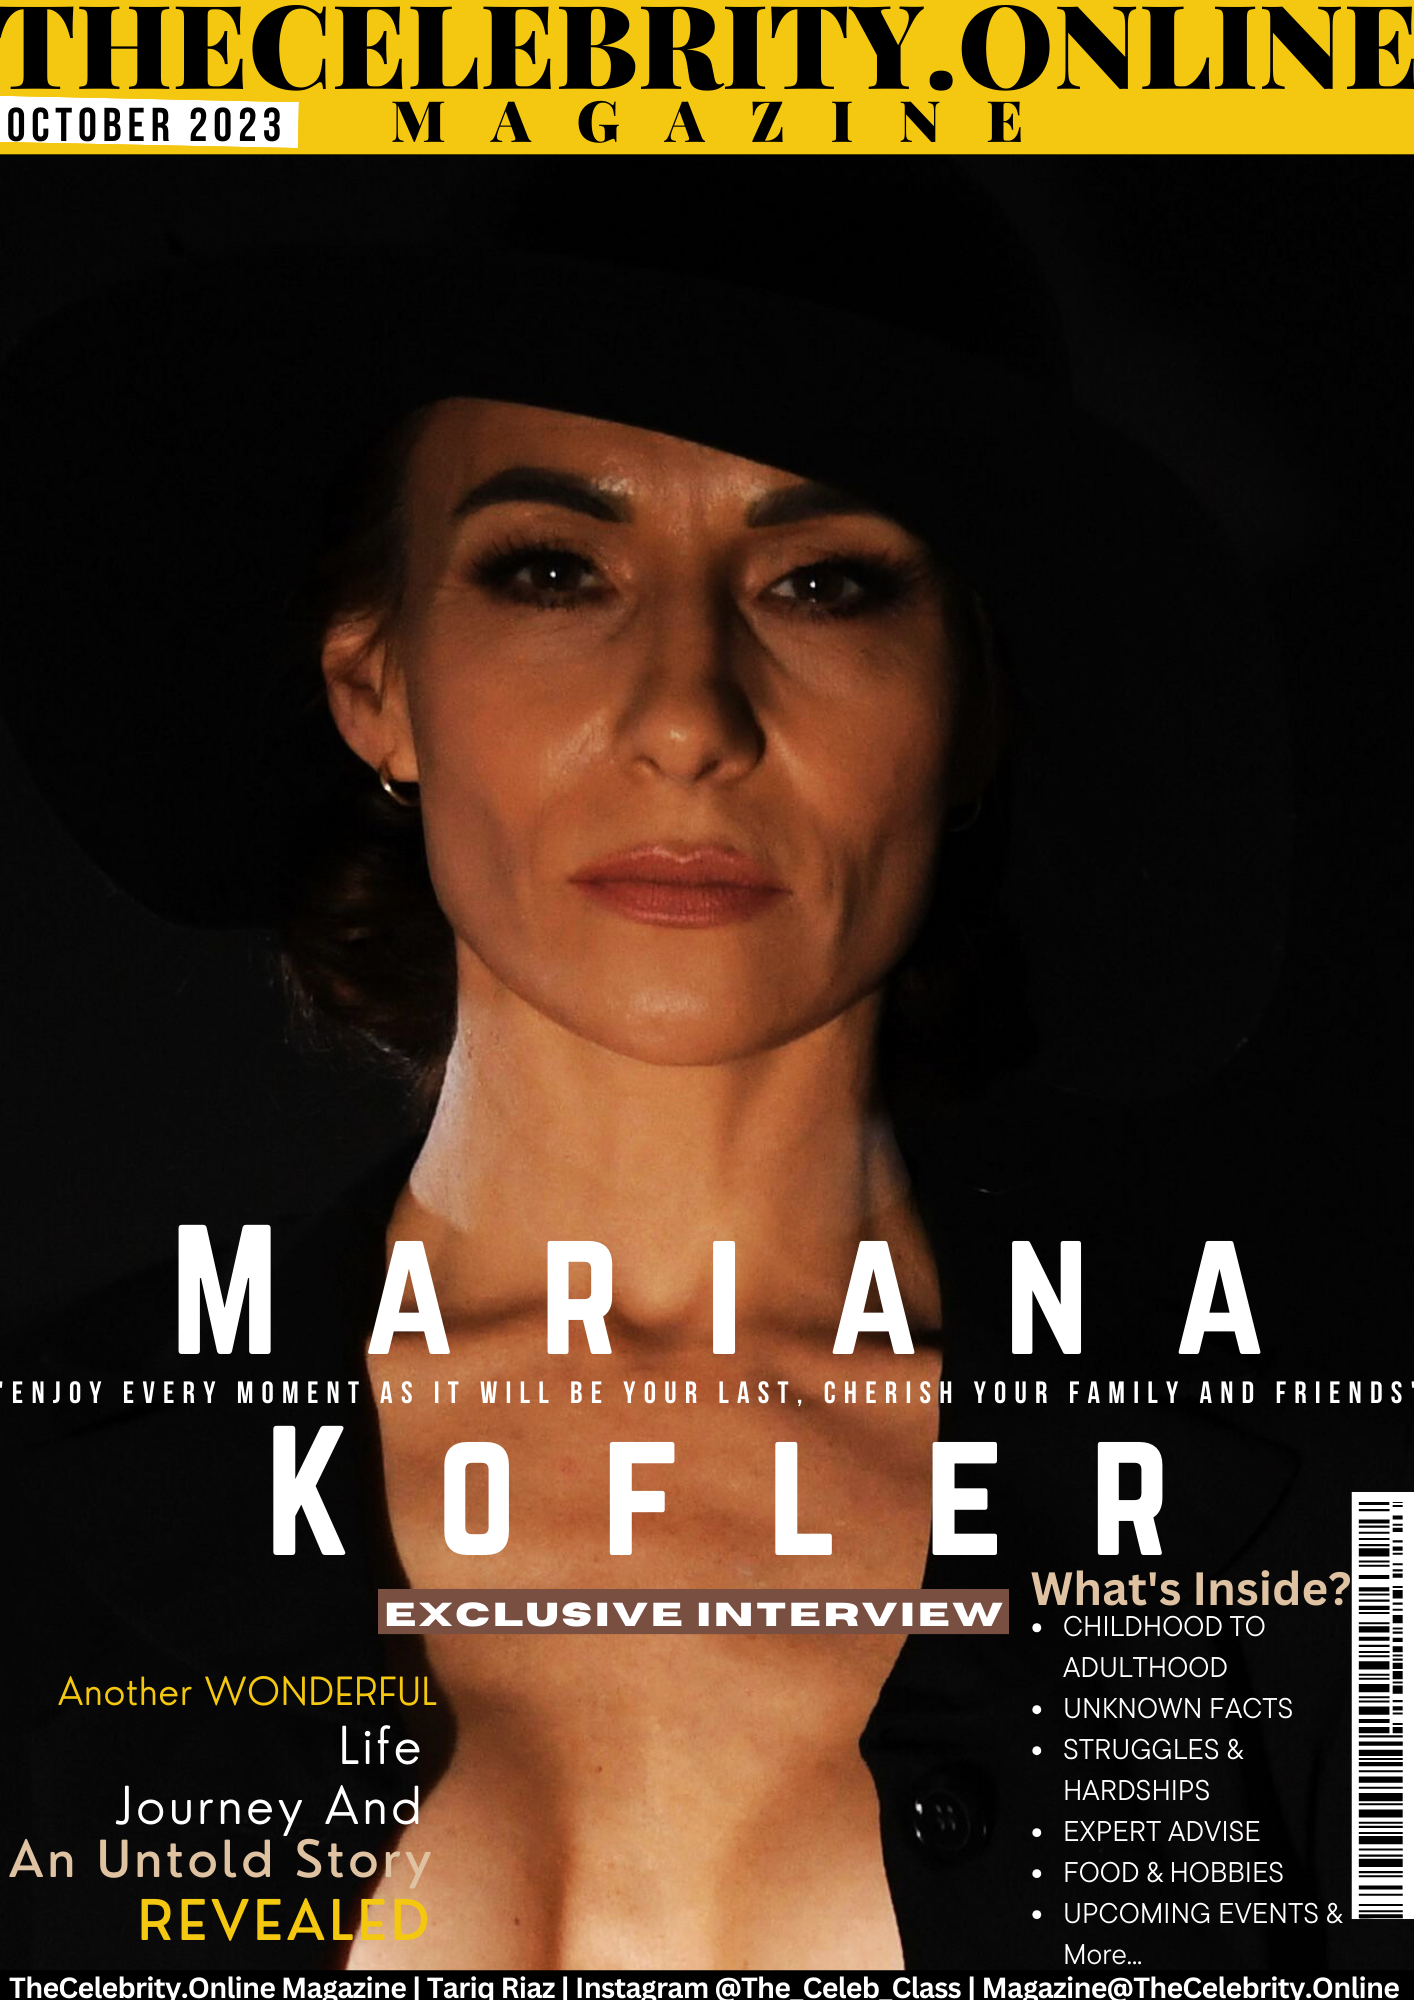 Mariana Kofler Exclusive Interview – ‘Enjoy Every Moment As It Will Be Your Last, Cherish Your Family And Friends’